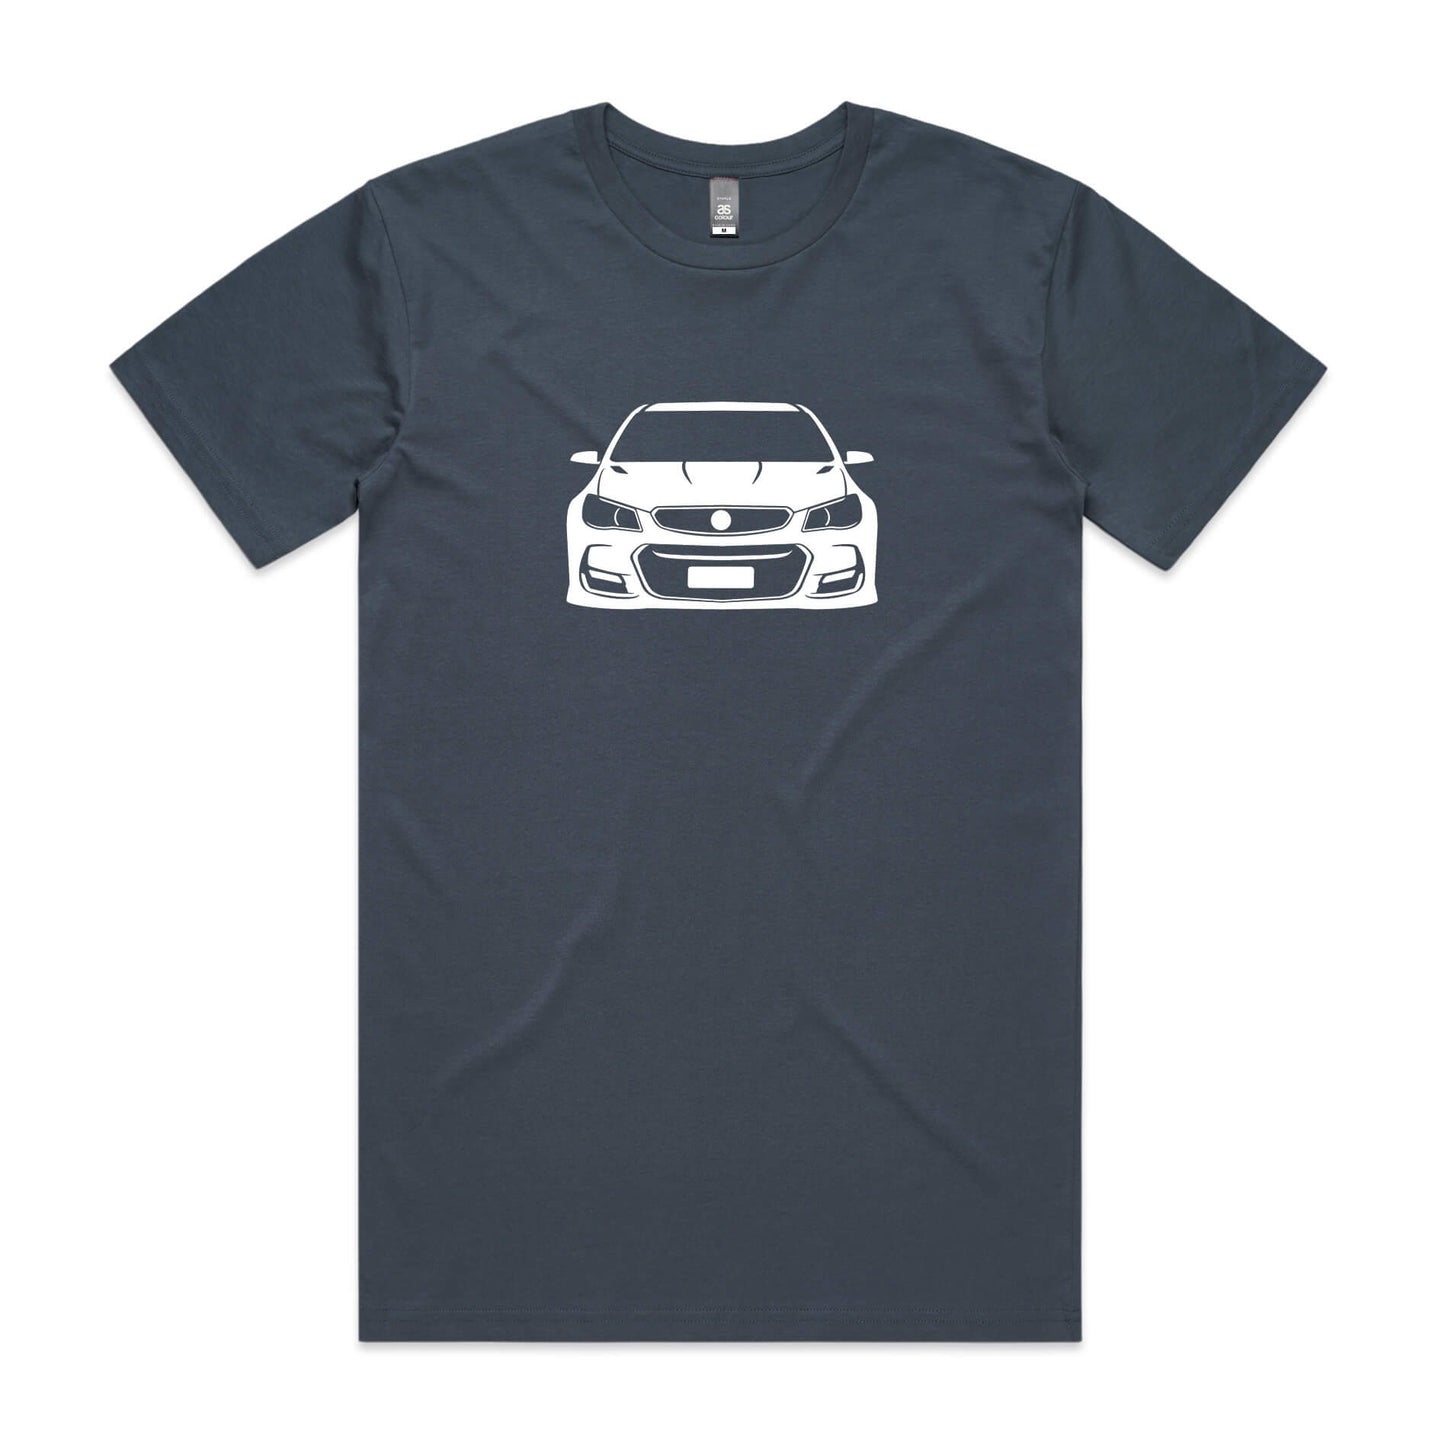 Holden VF Commodore t-shirt in petrol blue